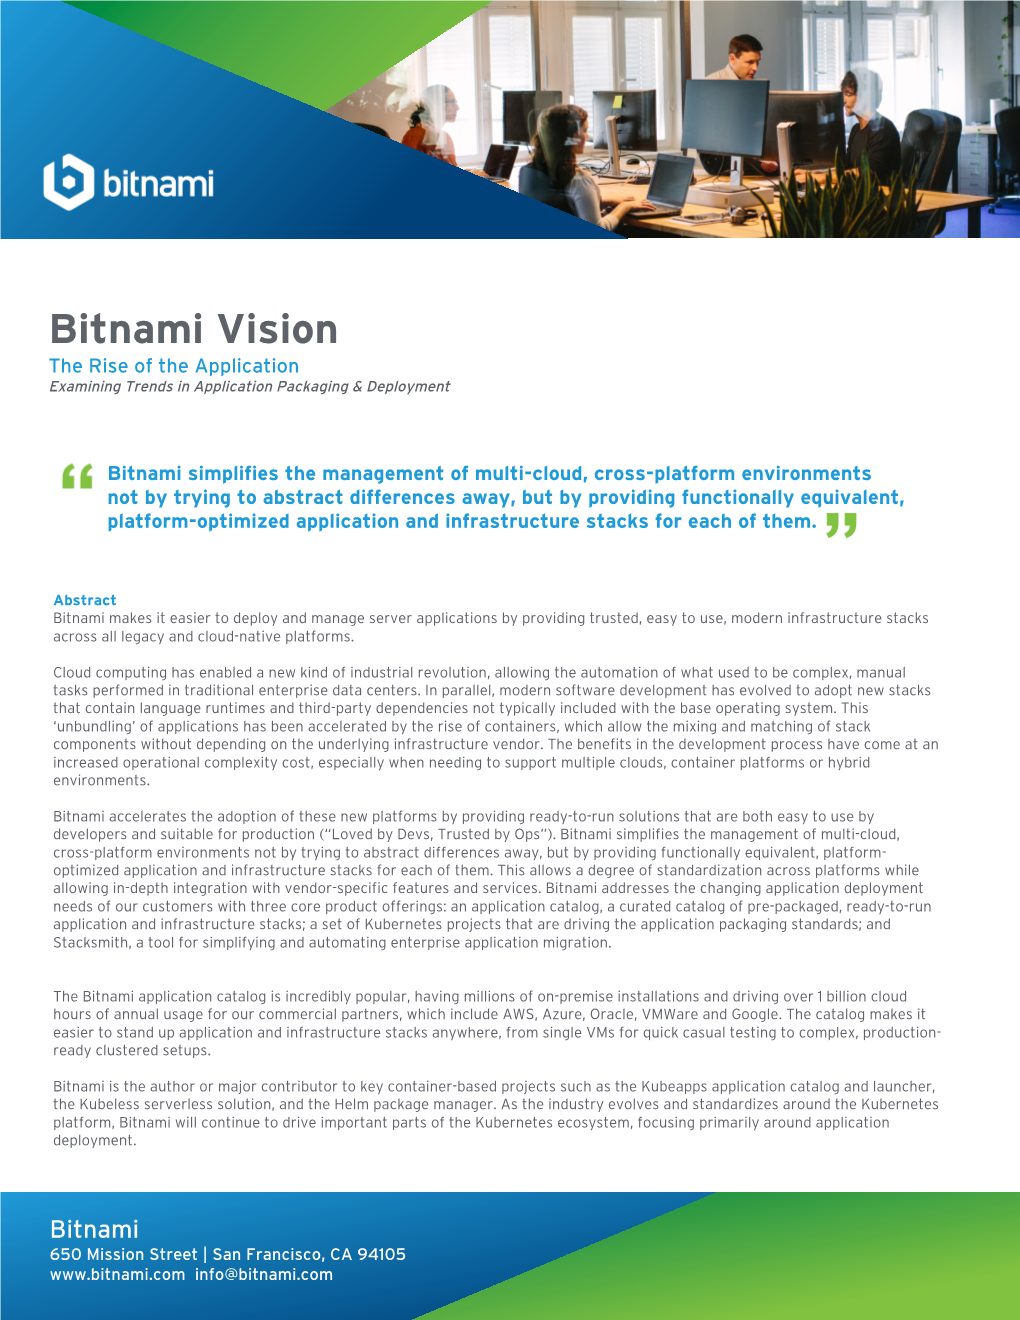 Bitnami Vision the Rise of the Application Examining Trends in Application Packaging & Deployment